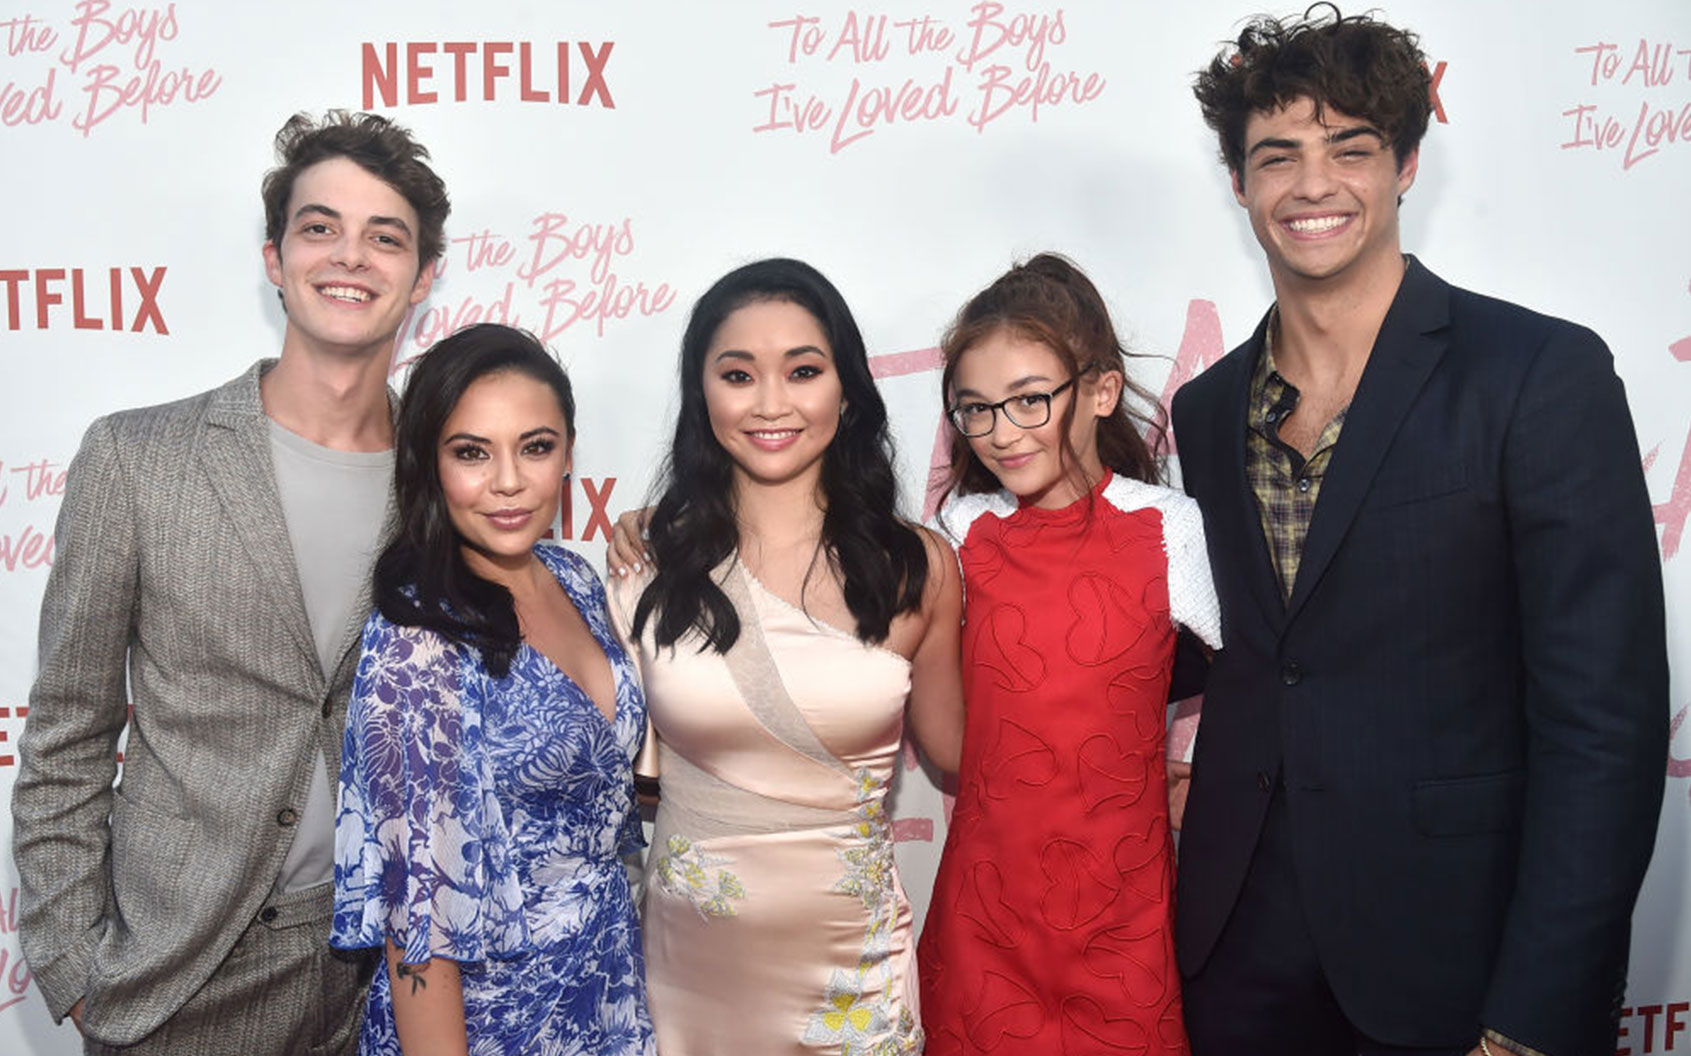 Lana Condor Says The ‘To All The Boys’ Cast Are Keen For A Sequel & Legit Same